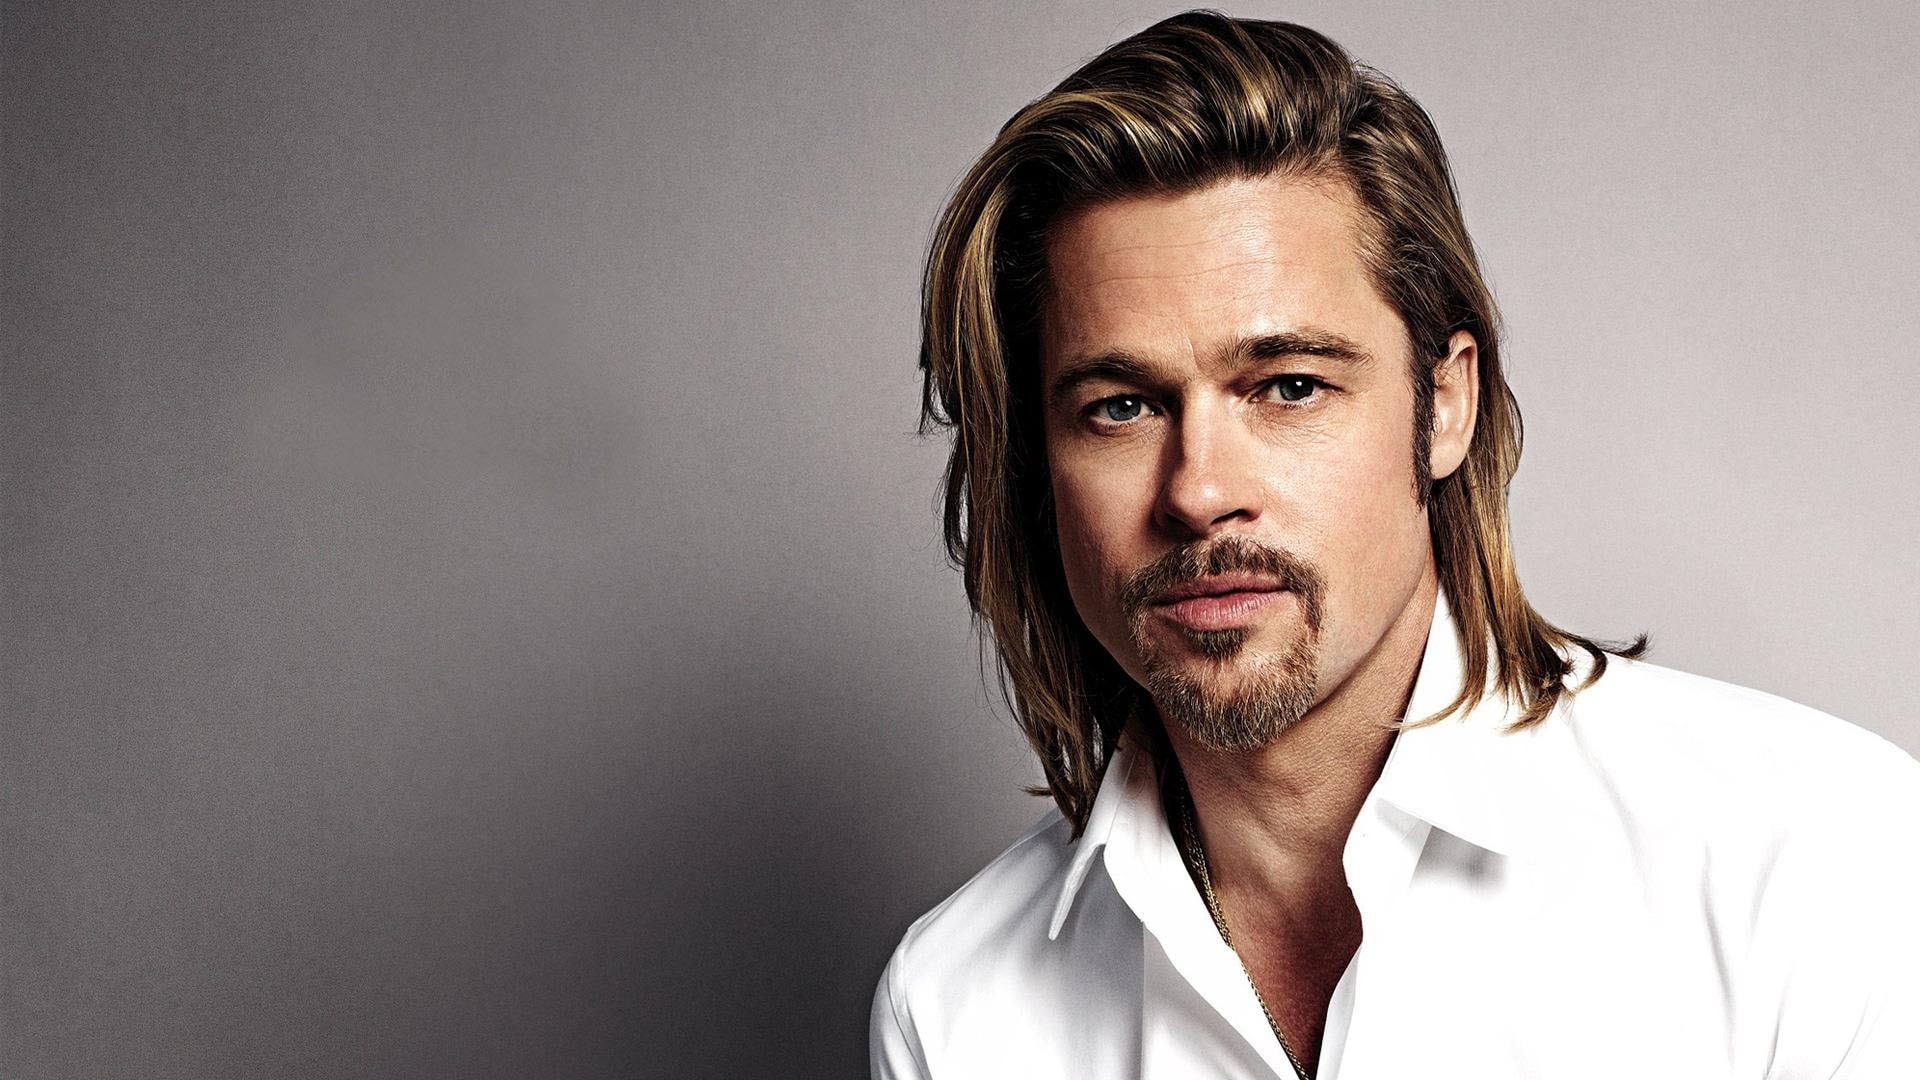 Brad Pitt: Cited by popular media as one of the most attractive men alive. 1920x1080 Full HD Wallpaper.